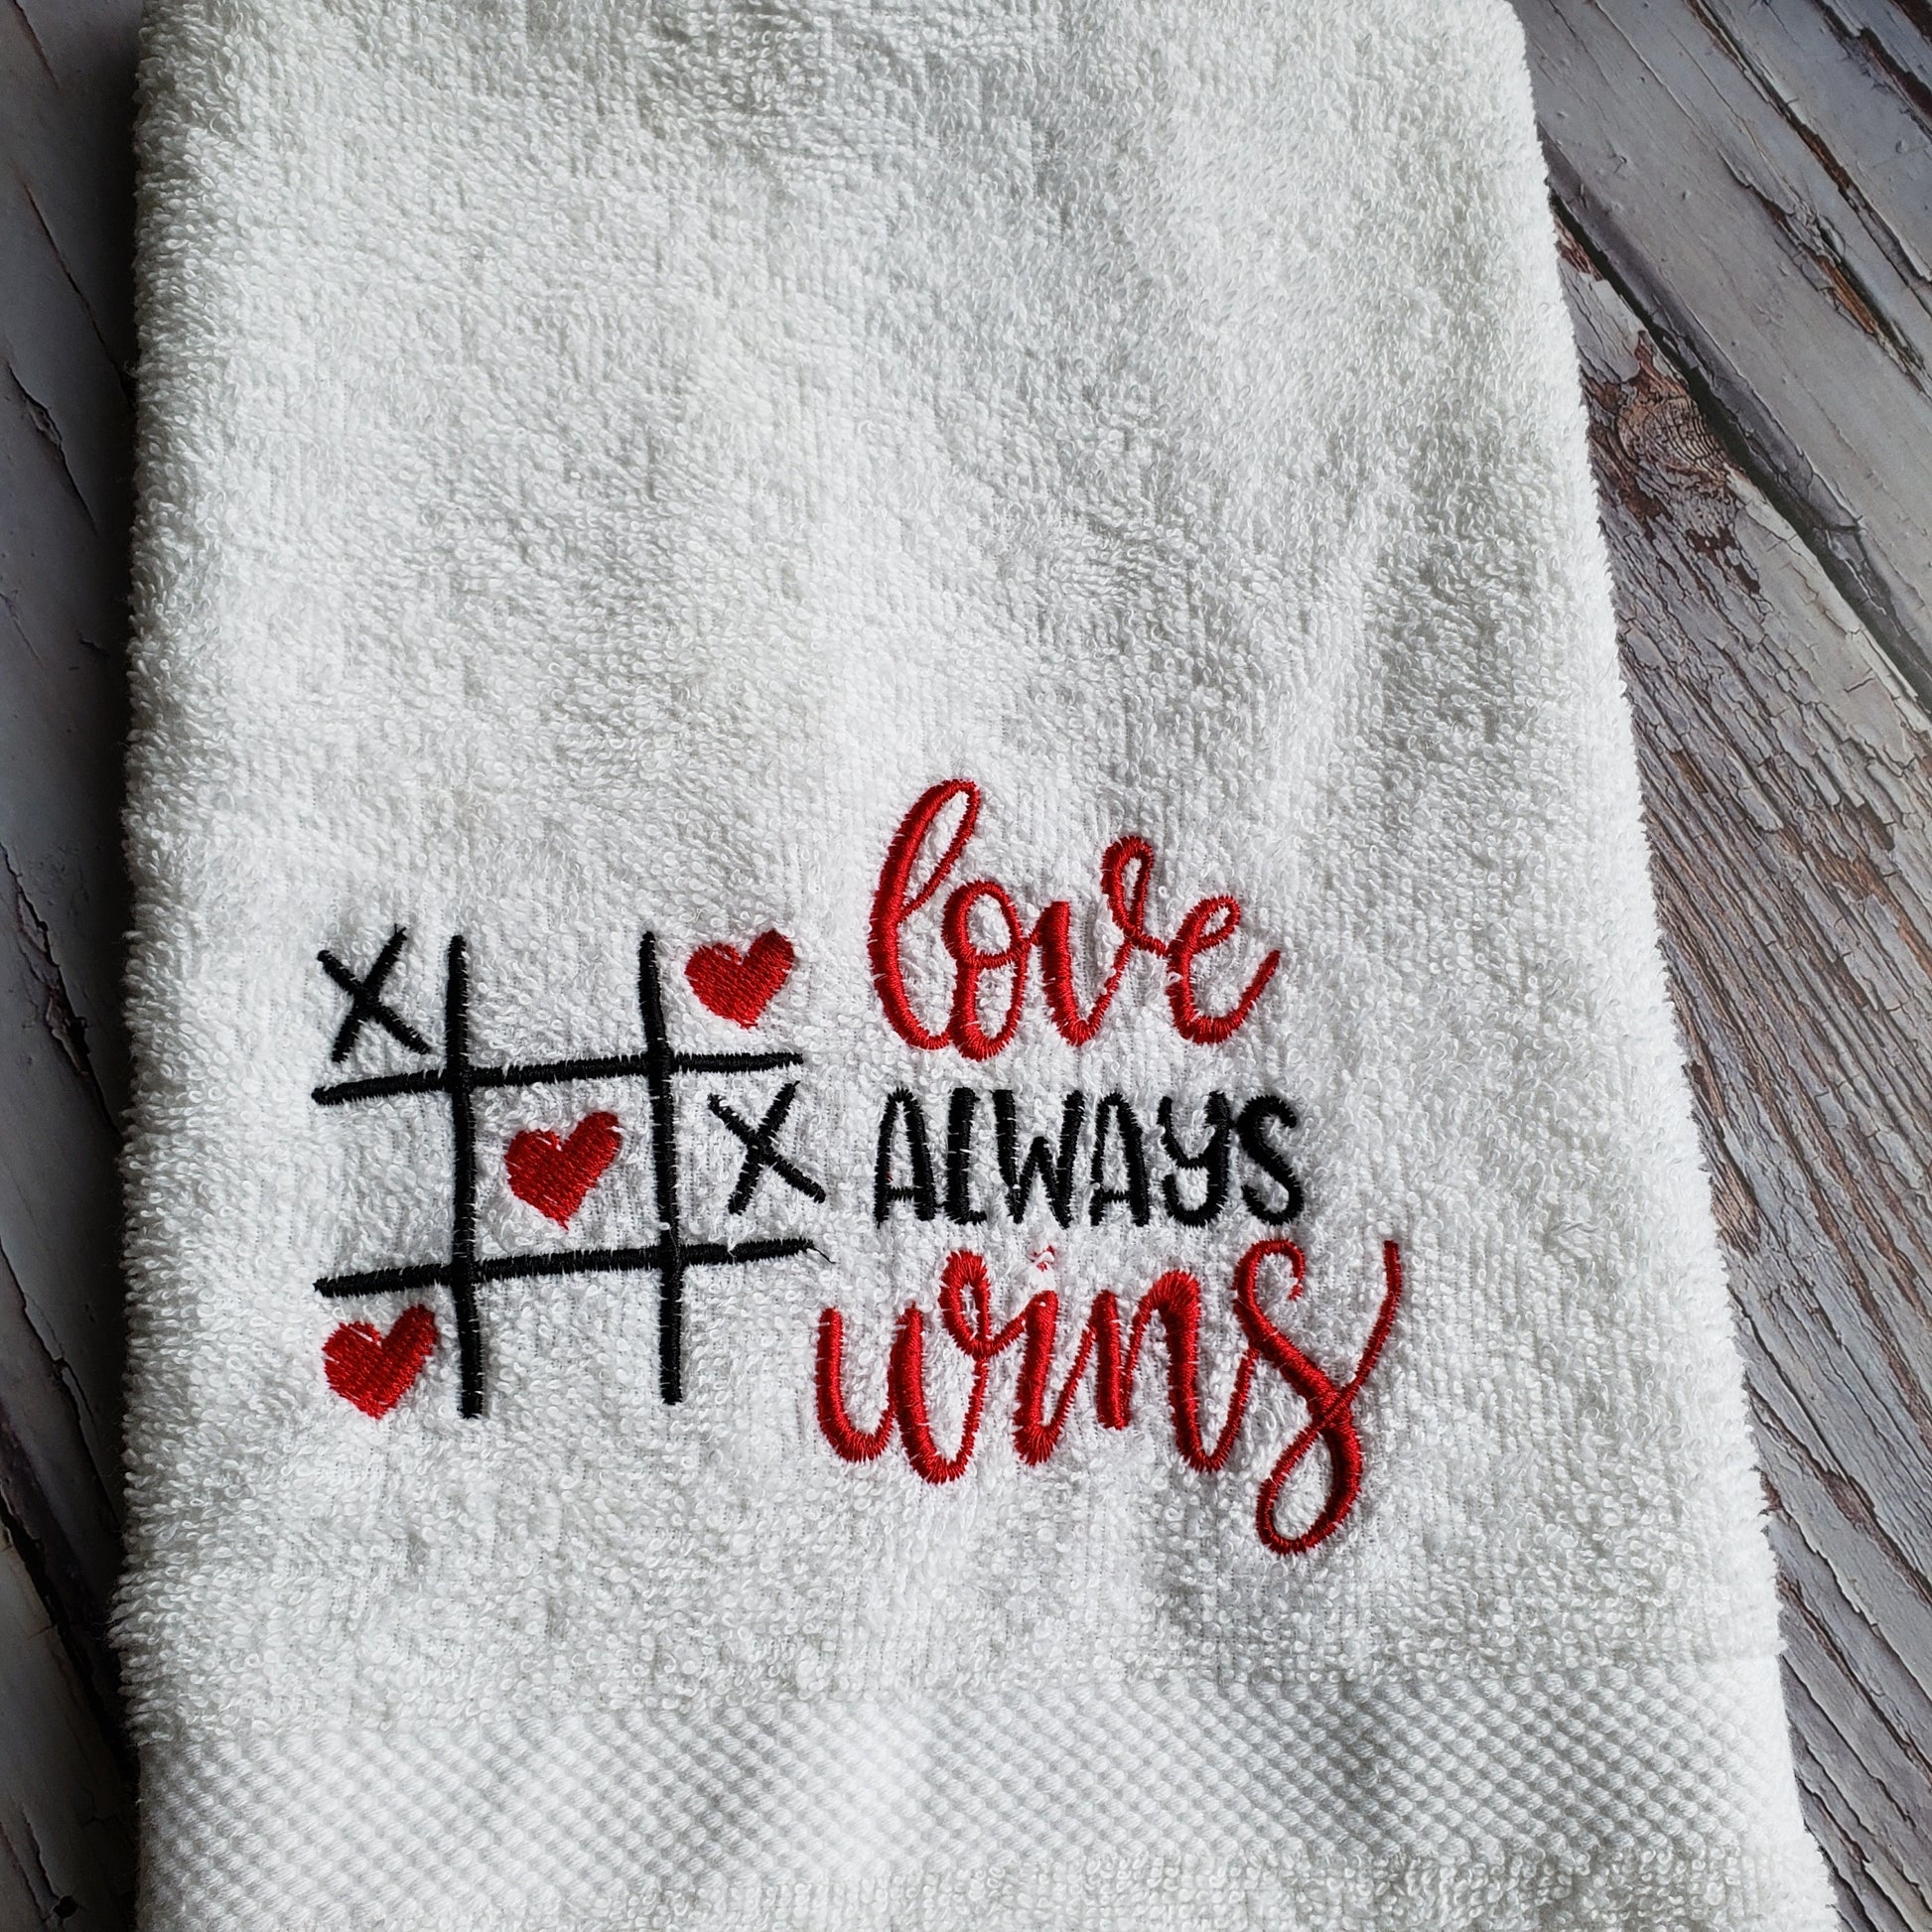 Hand Towel embroidered